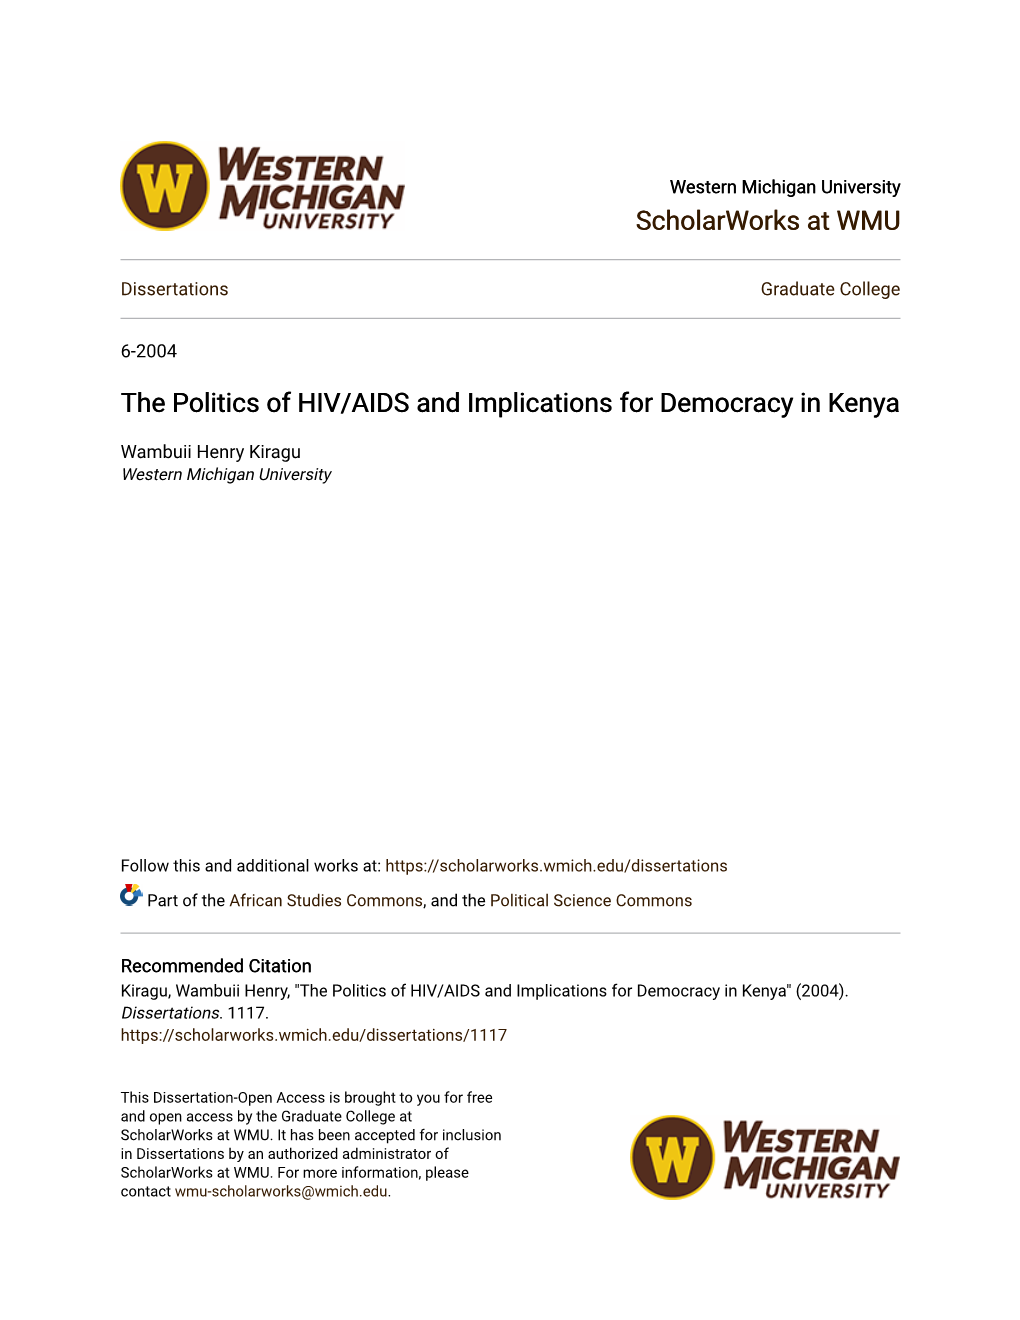 The Politics of HIV/AIDS and Implications for Democracy in Kenya